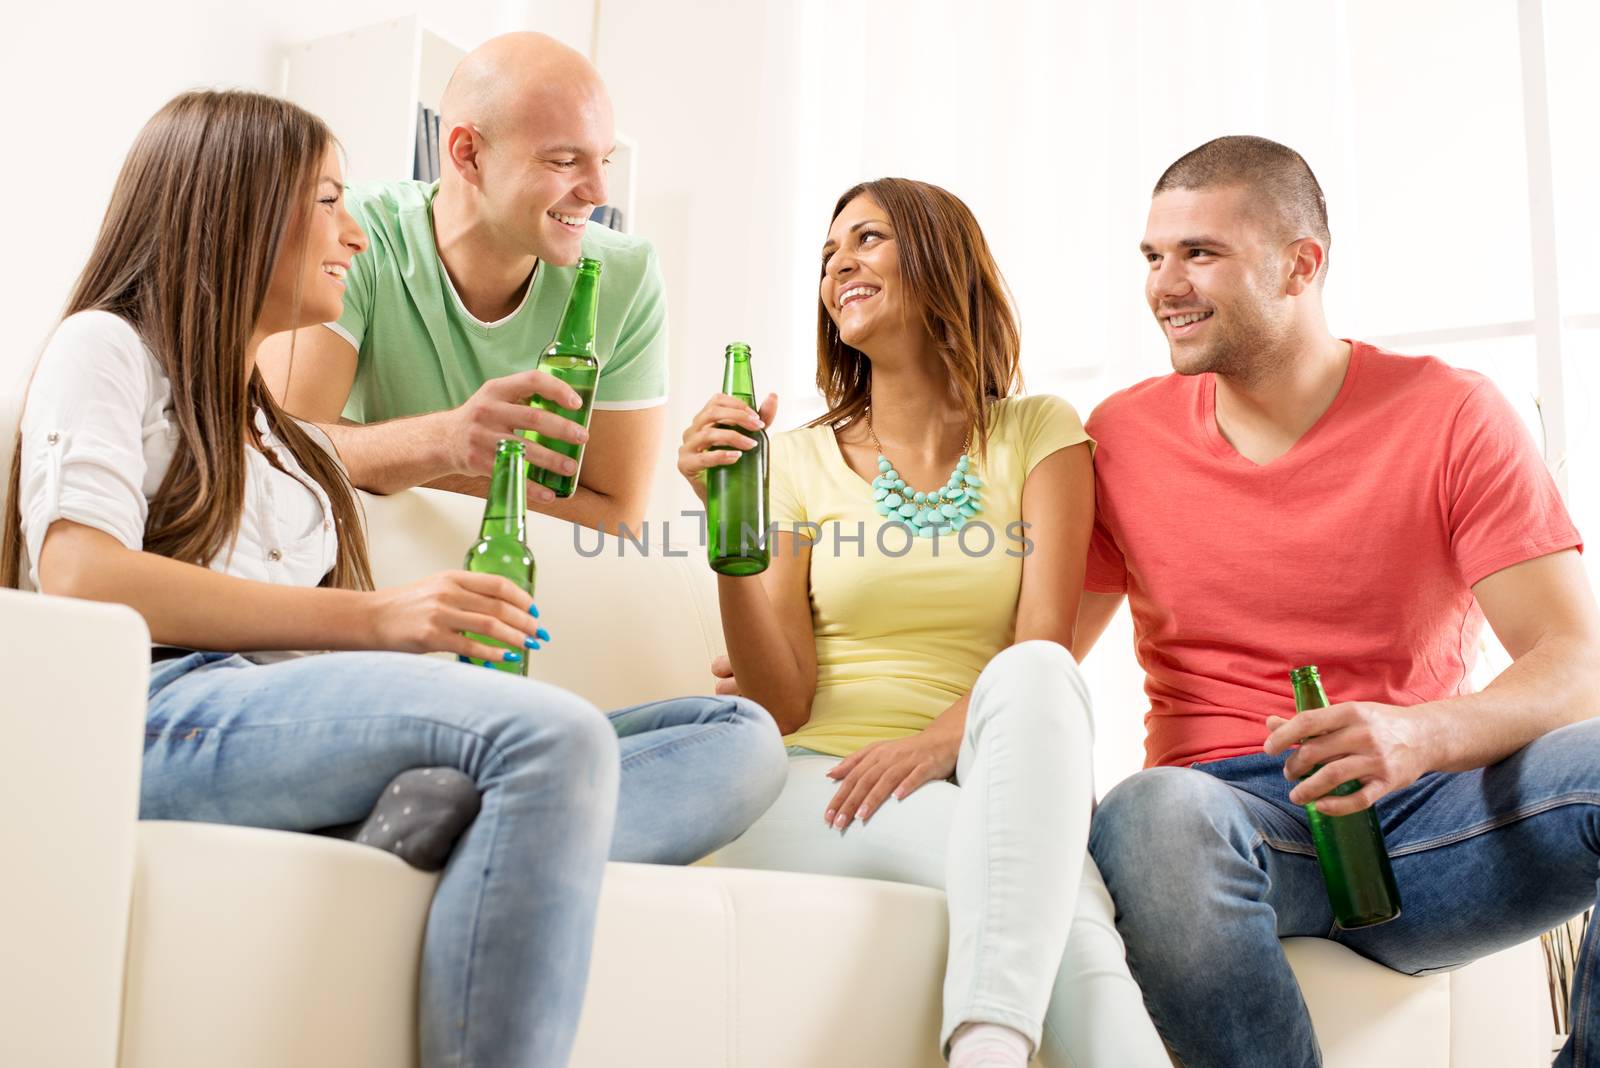 Four friends enjoying with beer together at the home party.